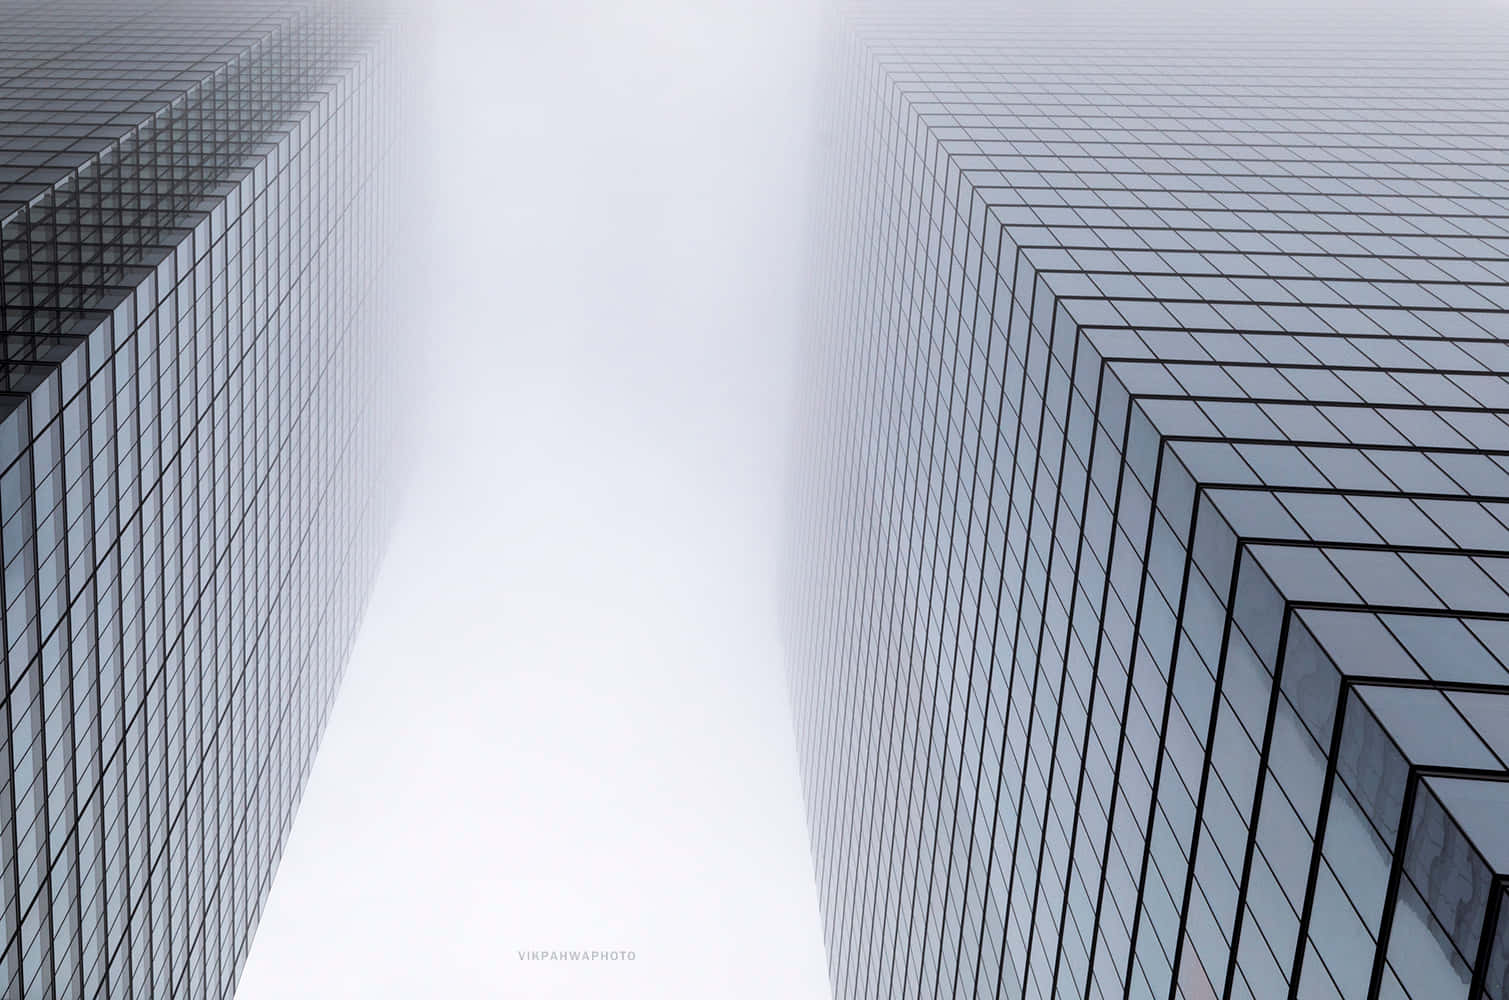 Two Tall Buildings In The Fog